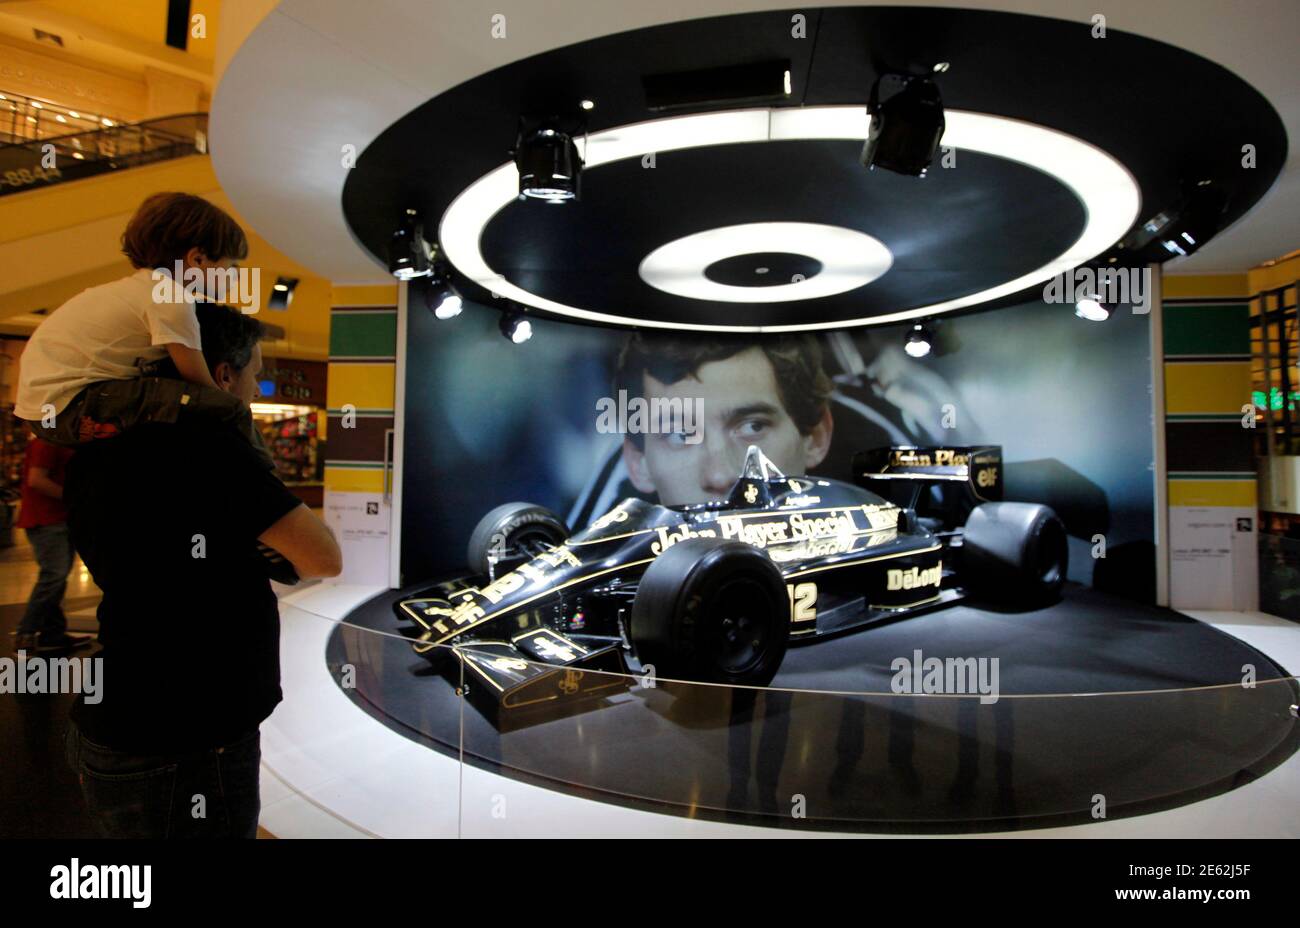 Visitors at Ayrton Senna John Player Special F1 car during an exhibition to mark the 20th anniversary of the of Brazilian triple Formula One champion Ayrton Senna in Sao